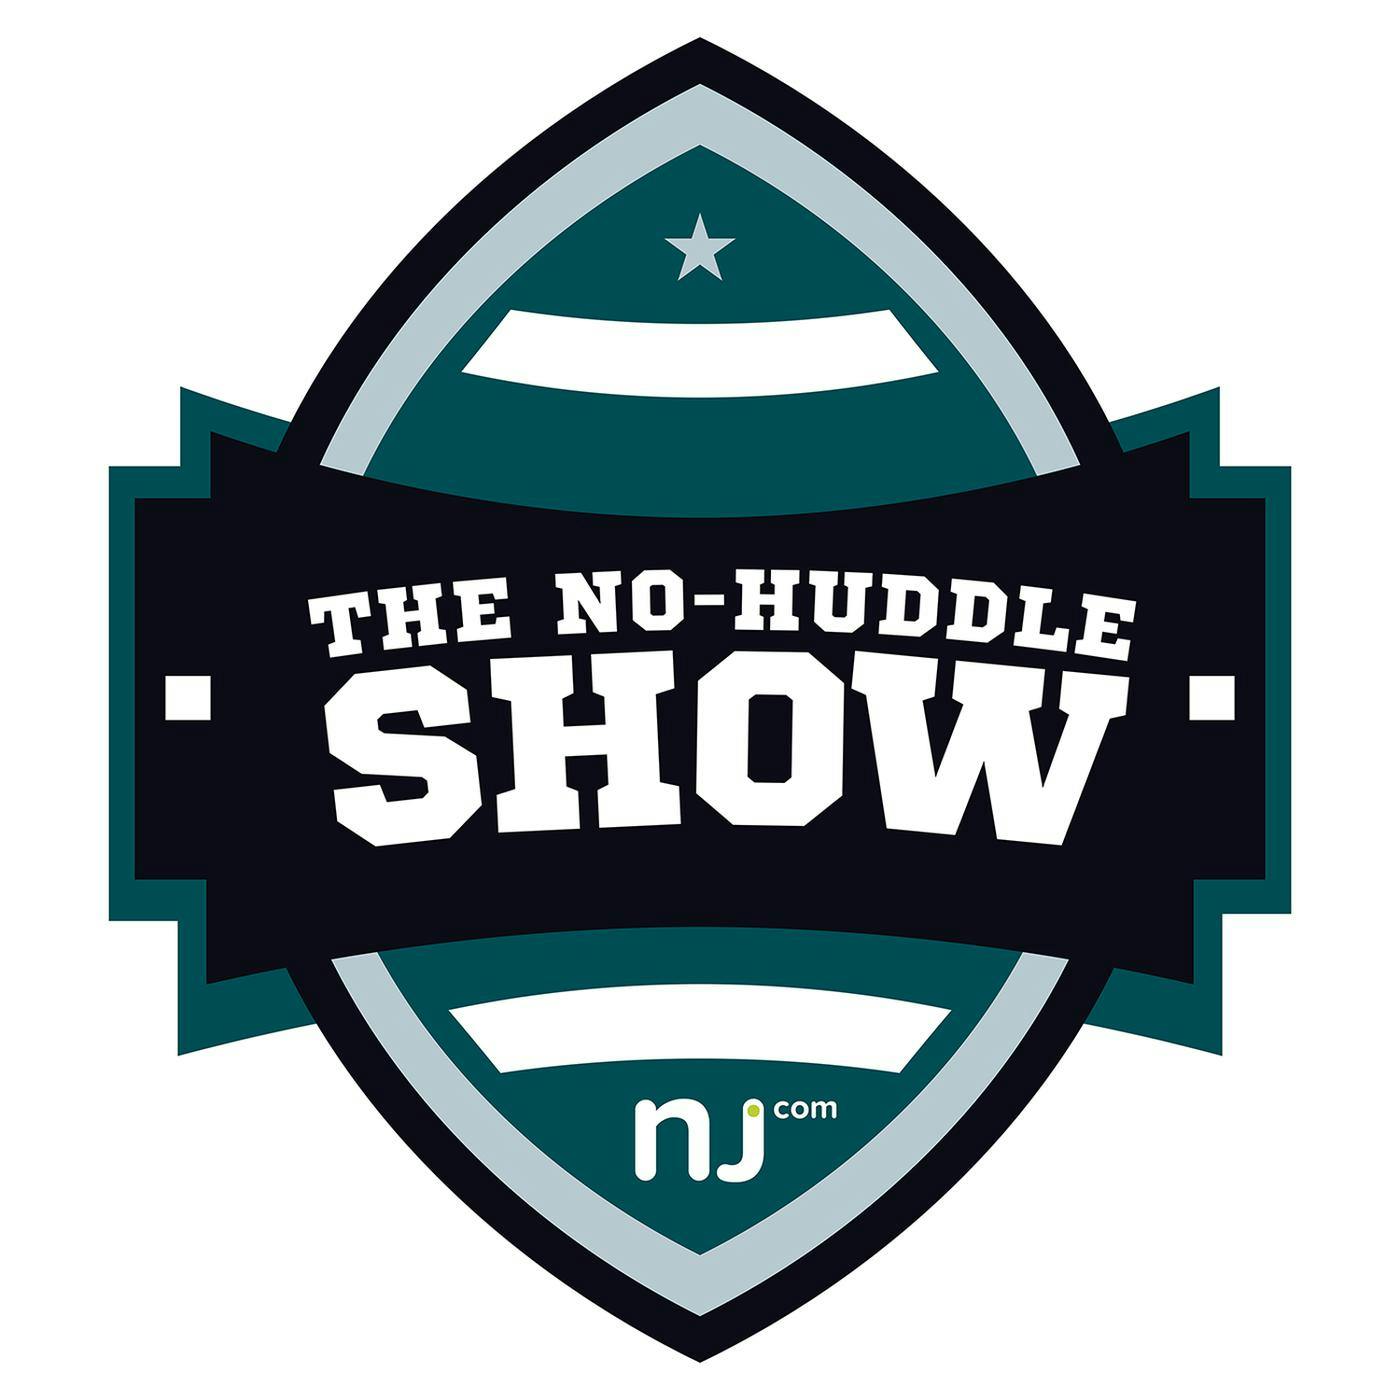 Is Nick Sirianni's job on the line if the Eagles lose Monday night? (Ep. 426)